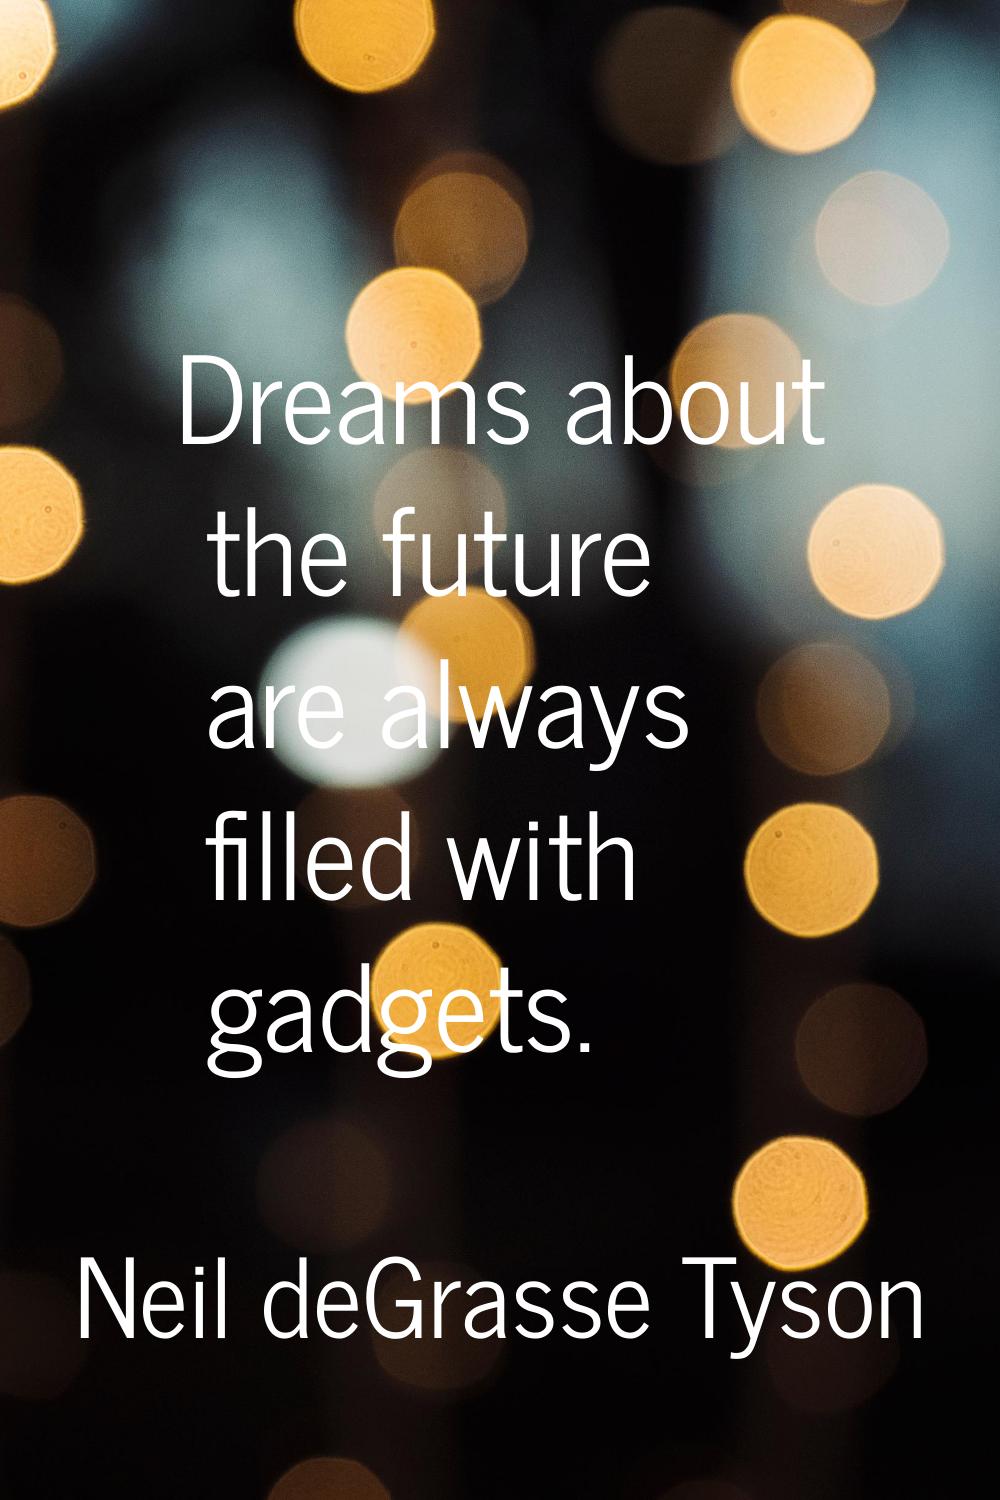 Dreams about the future are always filled with gadgets.